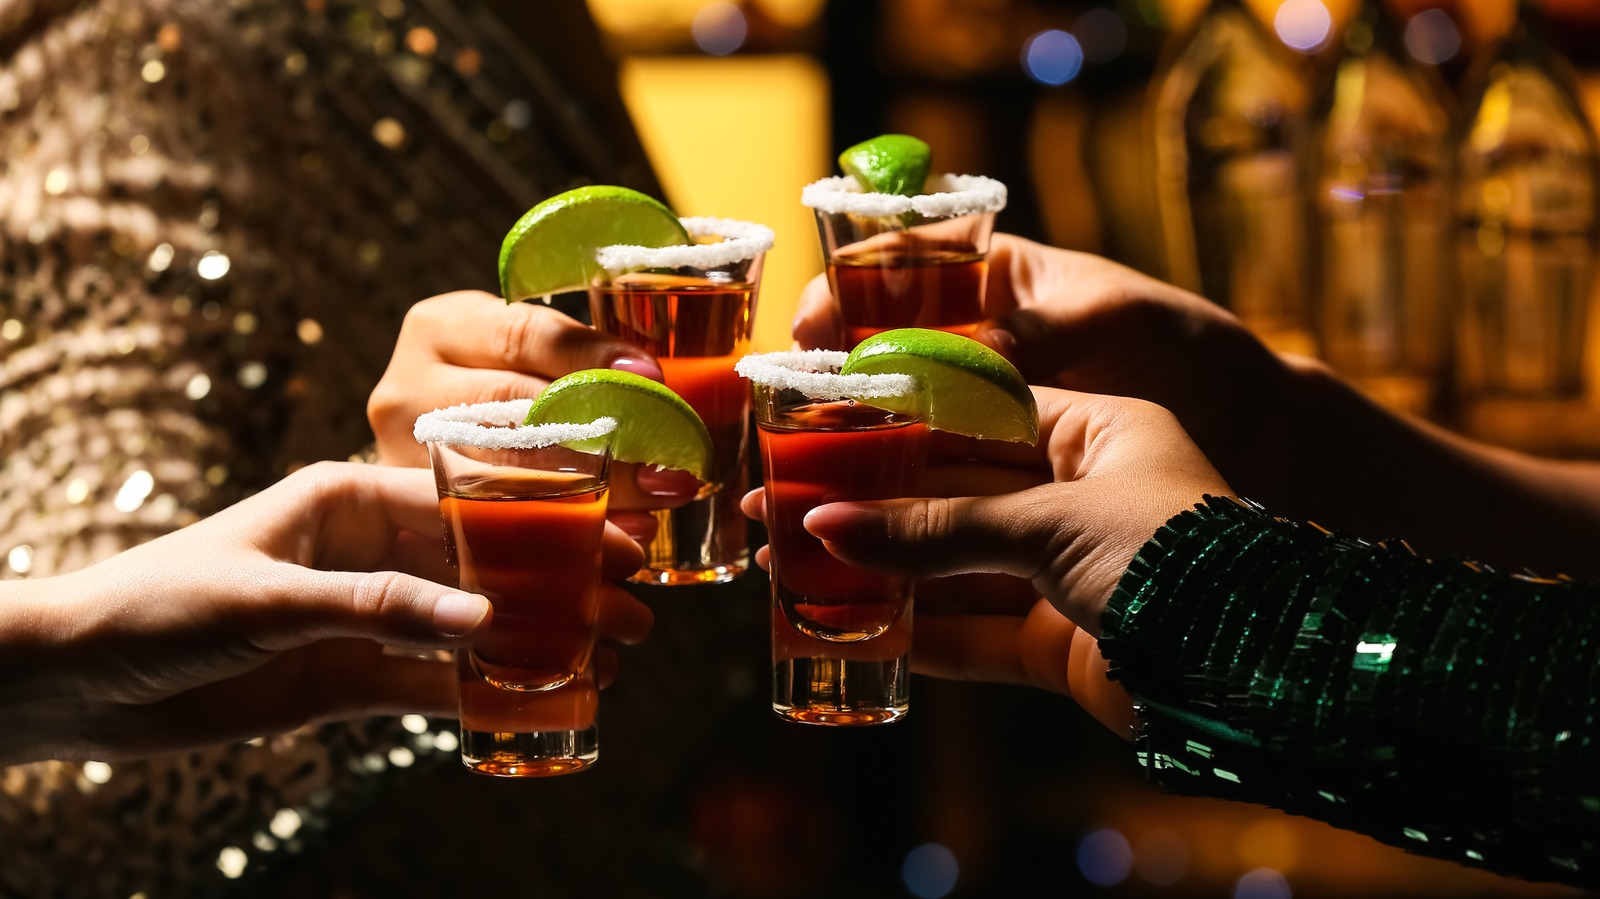 Sipping Authenticity: Why Best Reposado Tequila Is a Worthy Investment